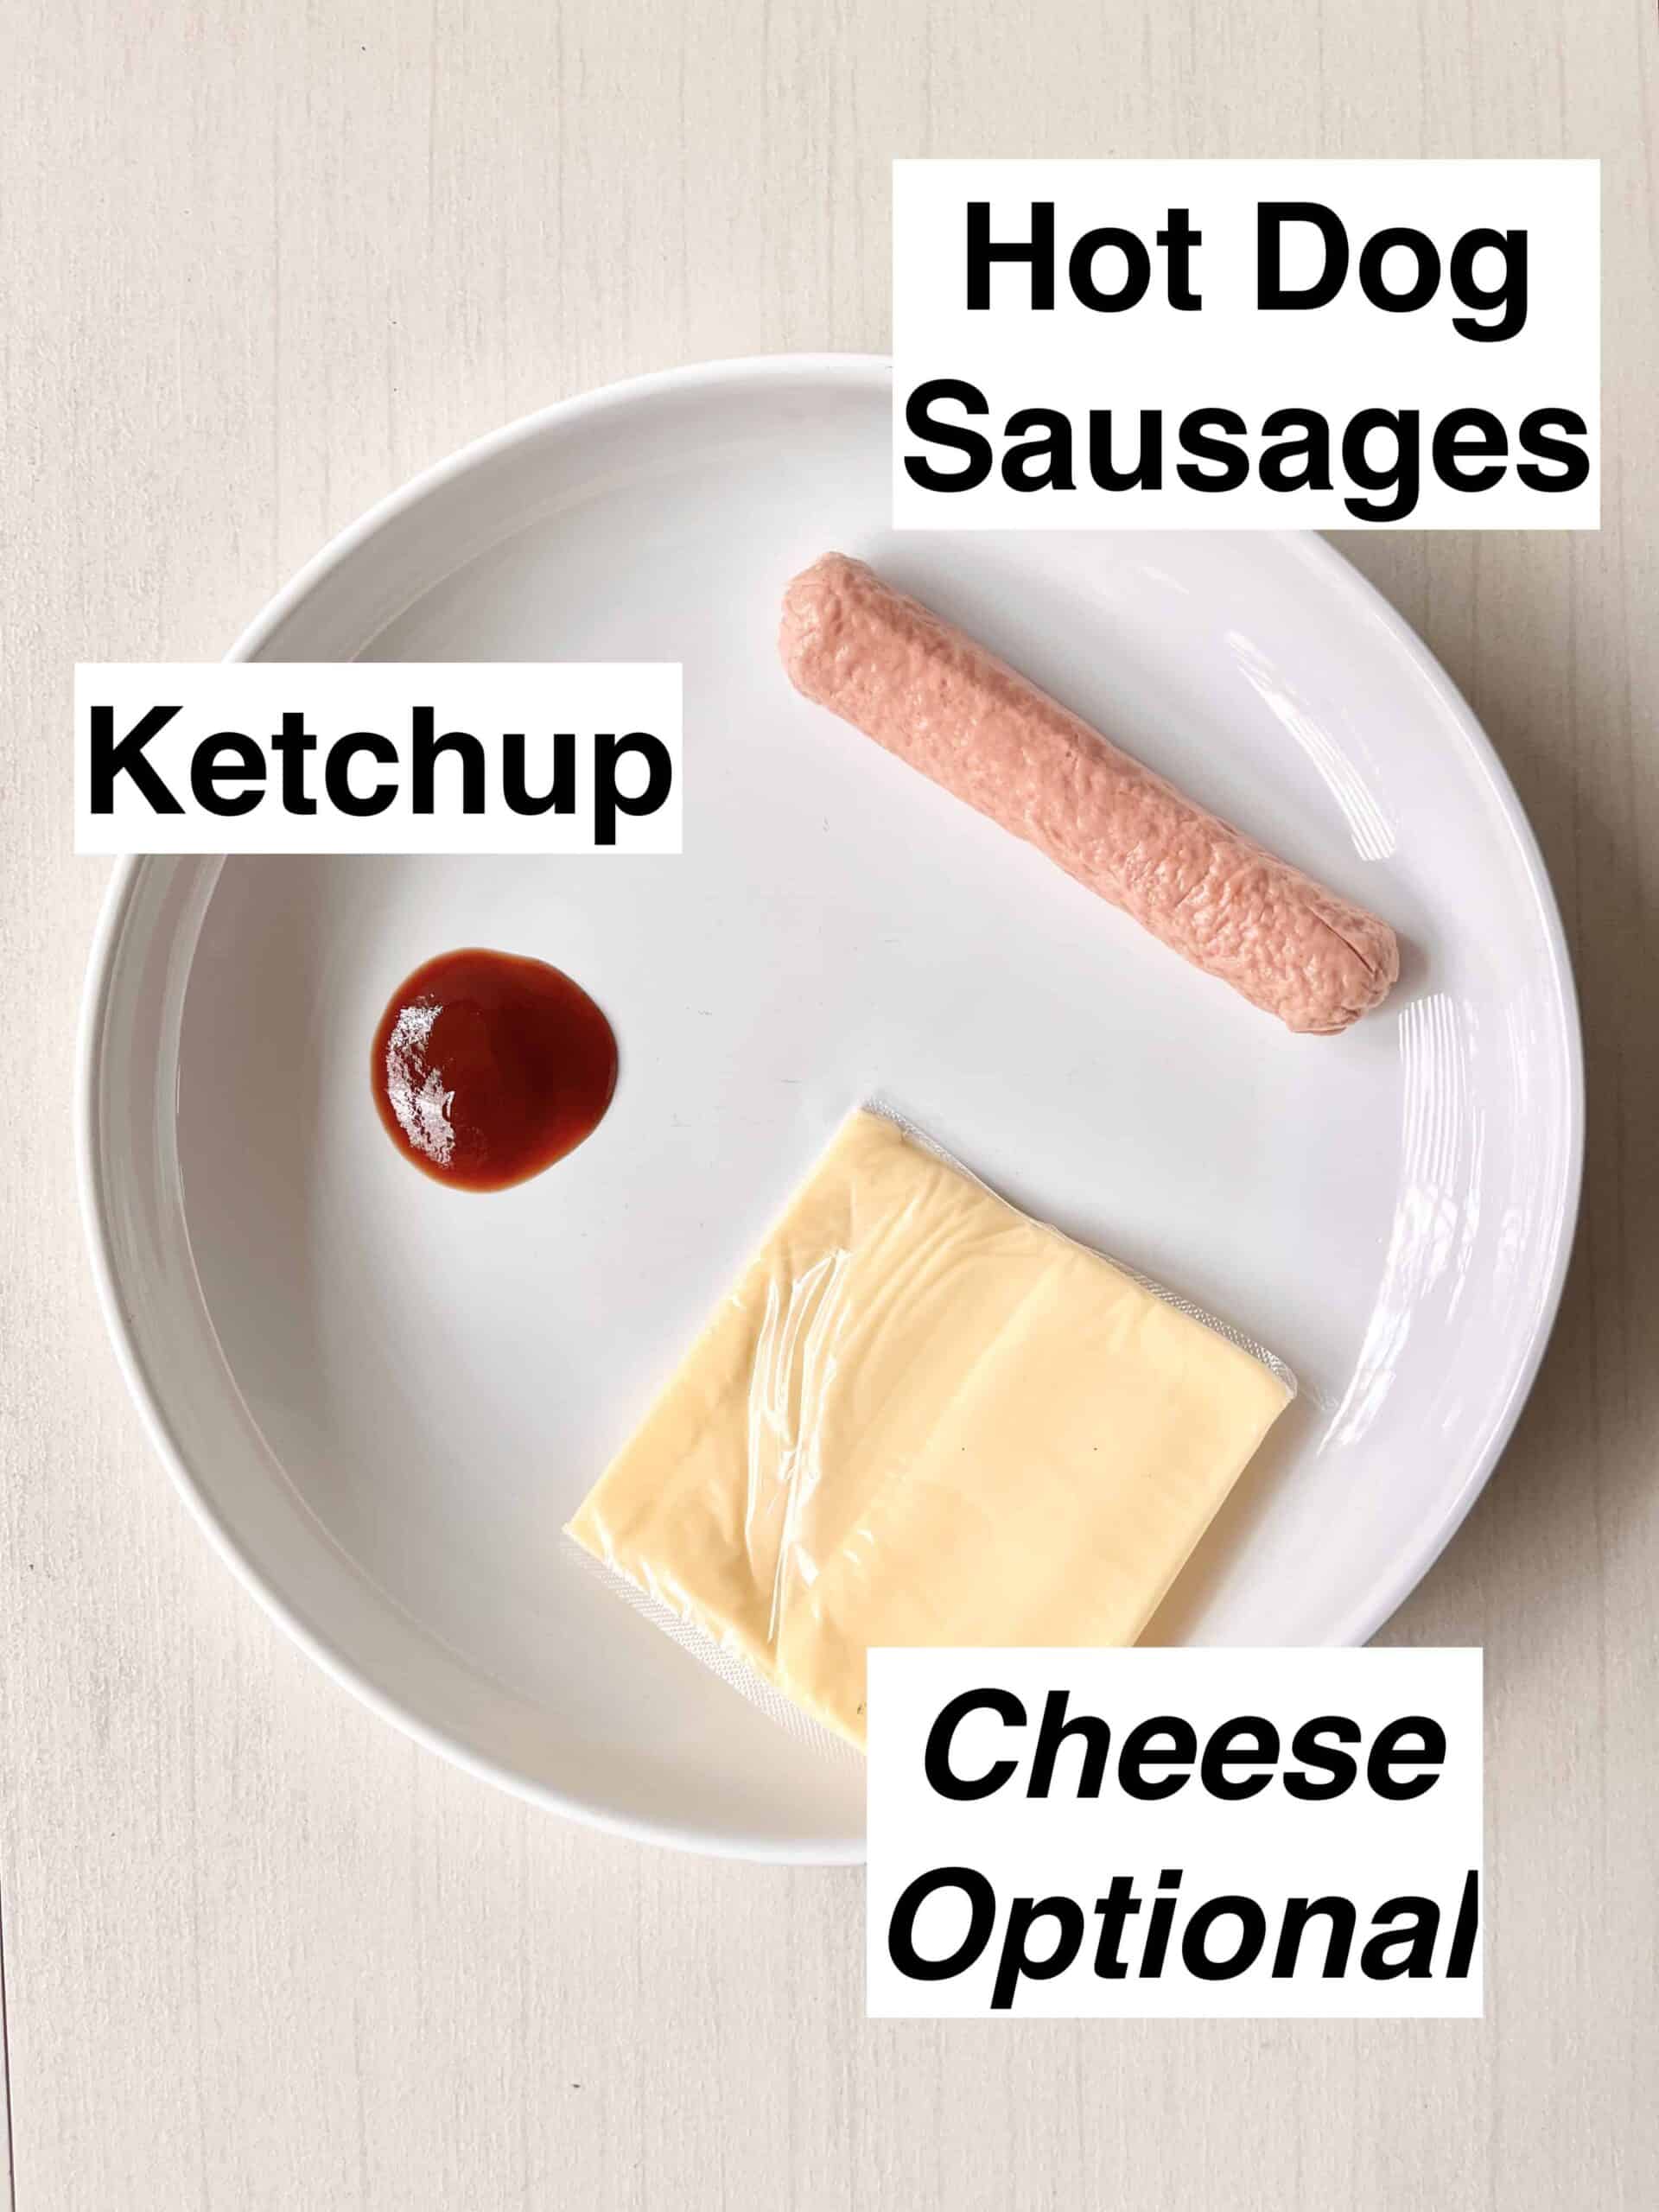 A boiled sausage, some ketchup and a slice of cheese on a white plate.